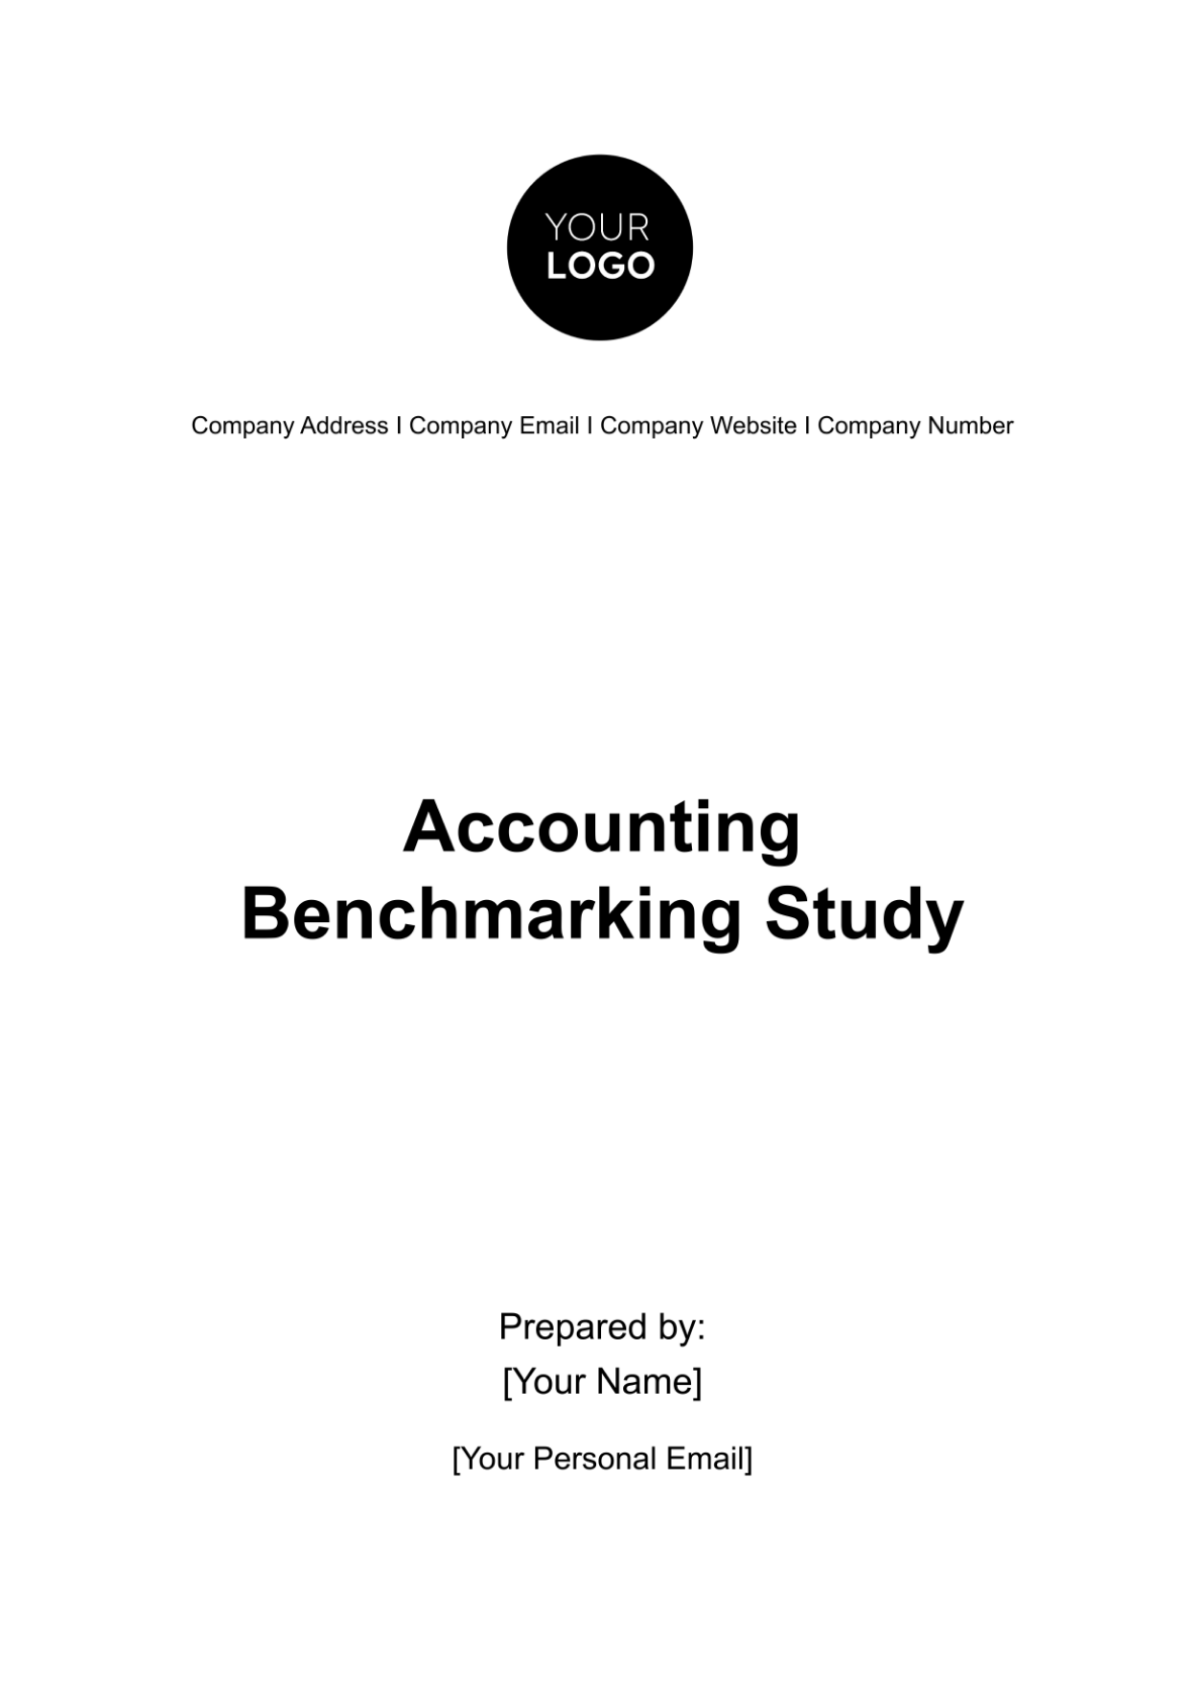 Free Accounting Benchmarking Study Template